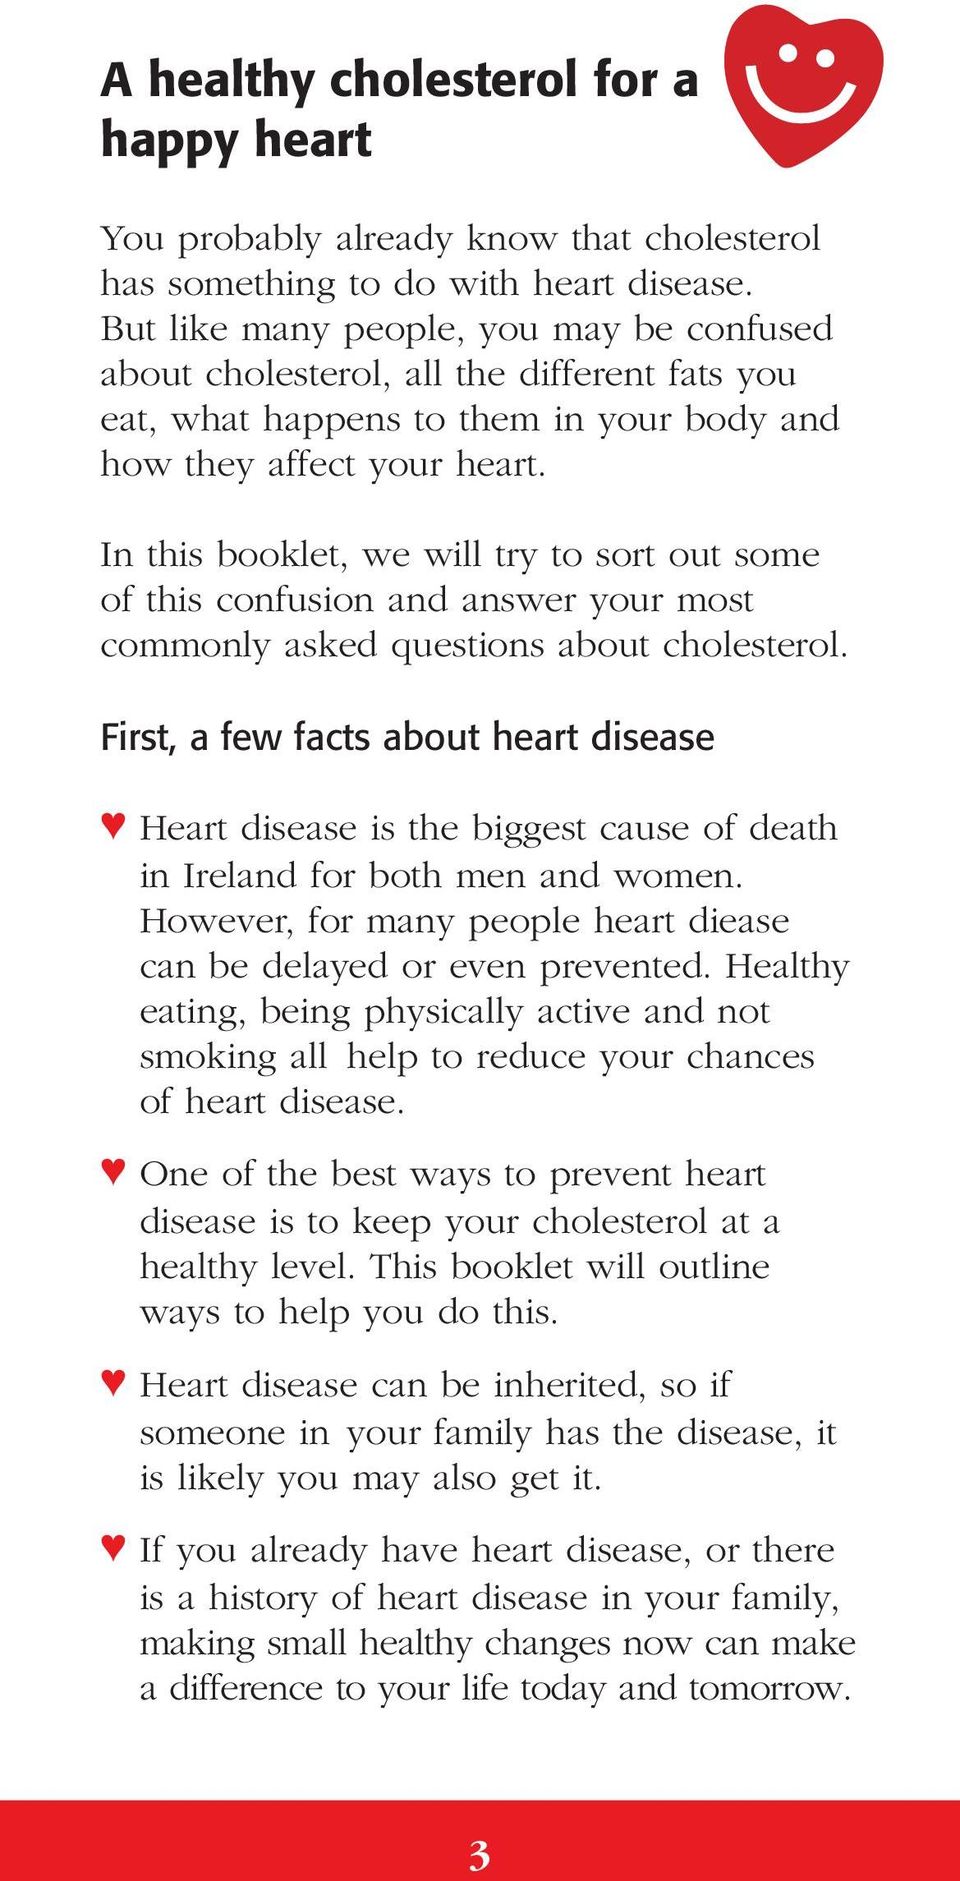 In this booklet, we will try to sort out some of this confusion and answer your most commonly asked questions about cholesterol.